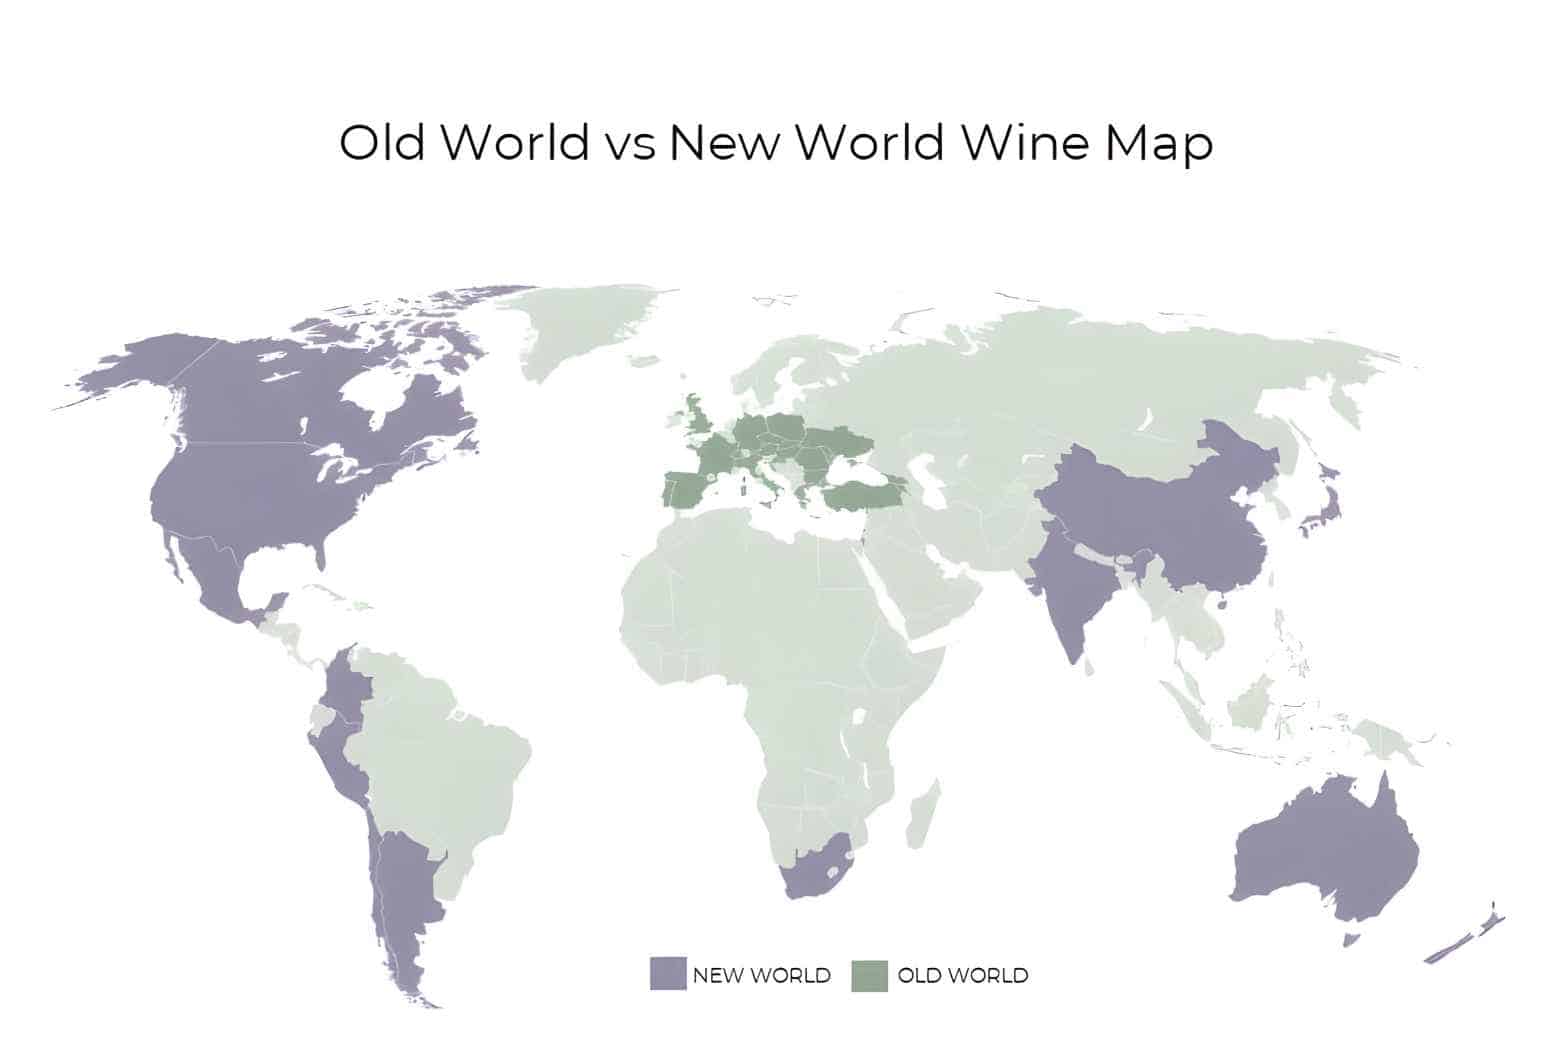 What Does Old World Wine and New World Wine Mean